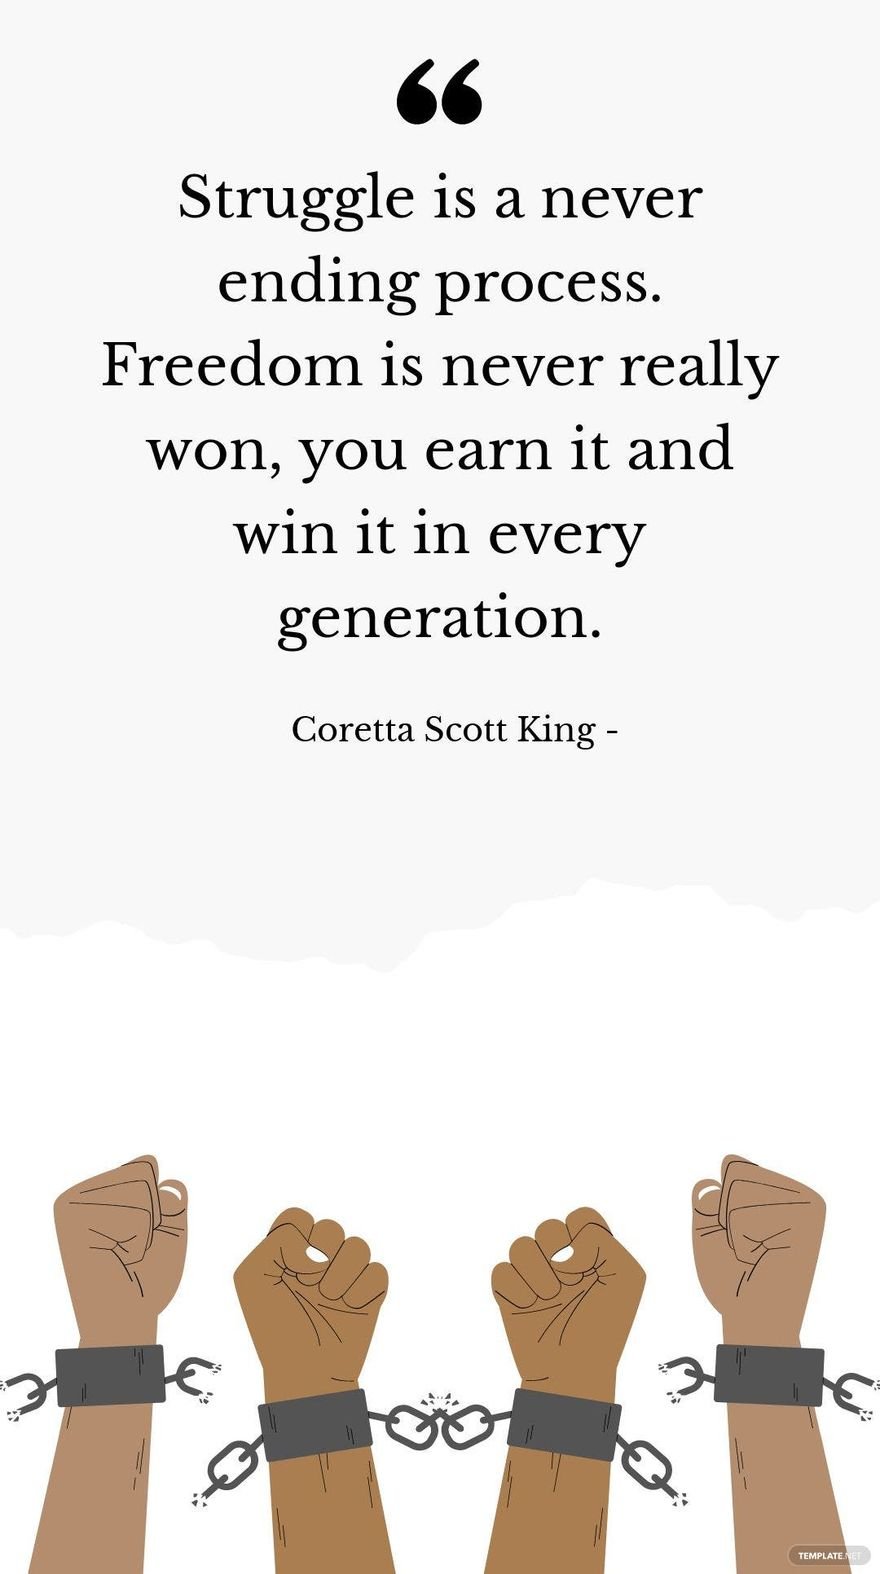 Coretta Scott King - Struggle is a never ending process. Freedom is never really won, you earn it and win it in every generation.